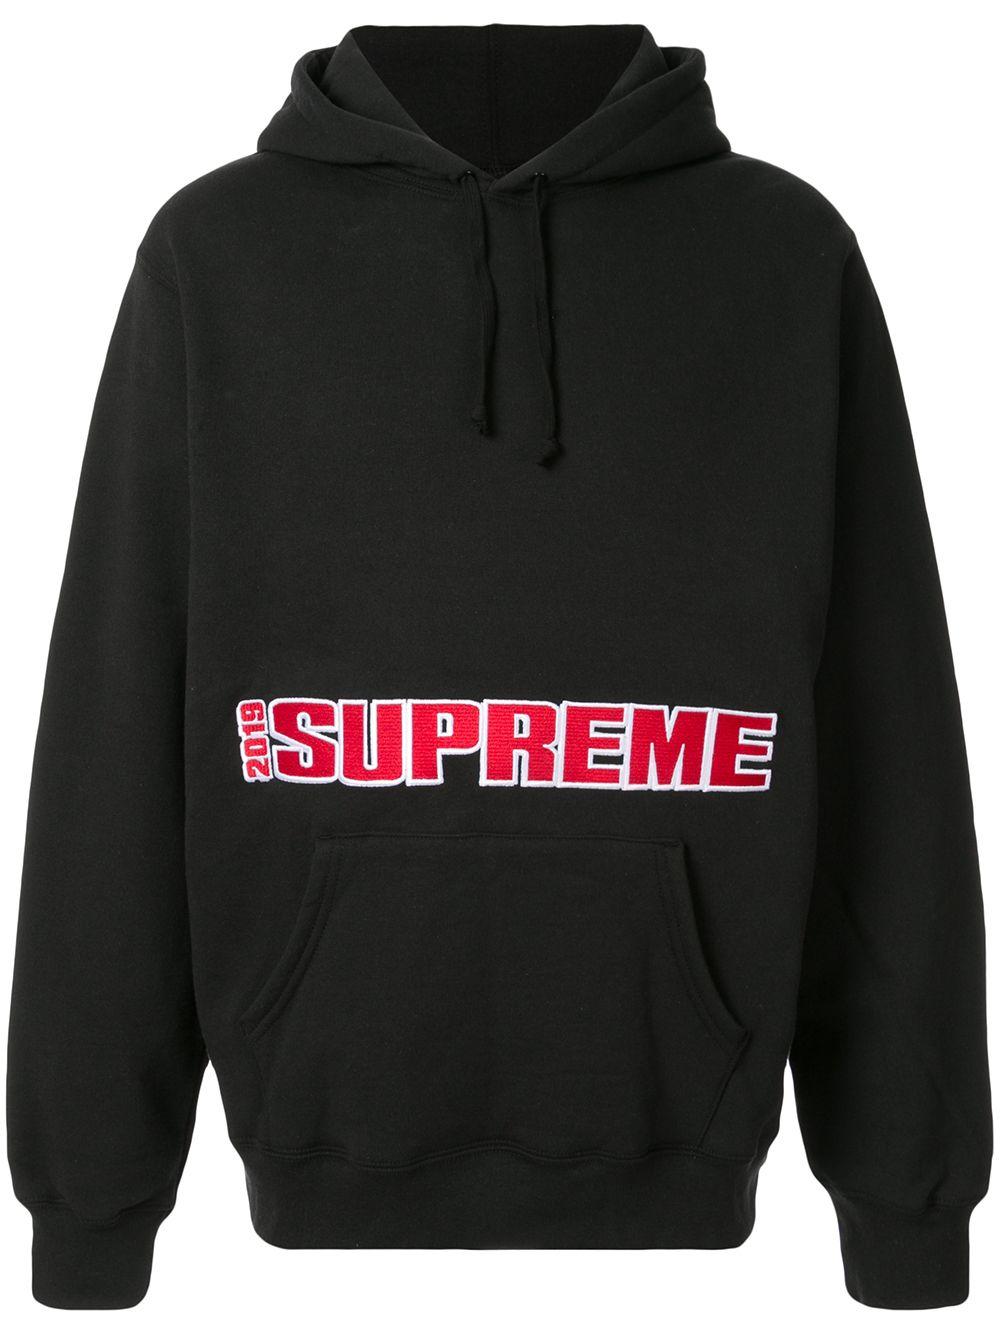 Supreme Cotton 2019 Hoodie in Black for Men - Lyst